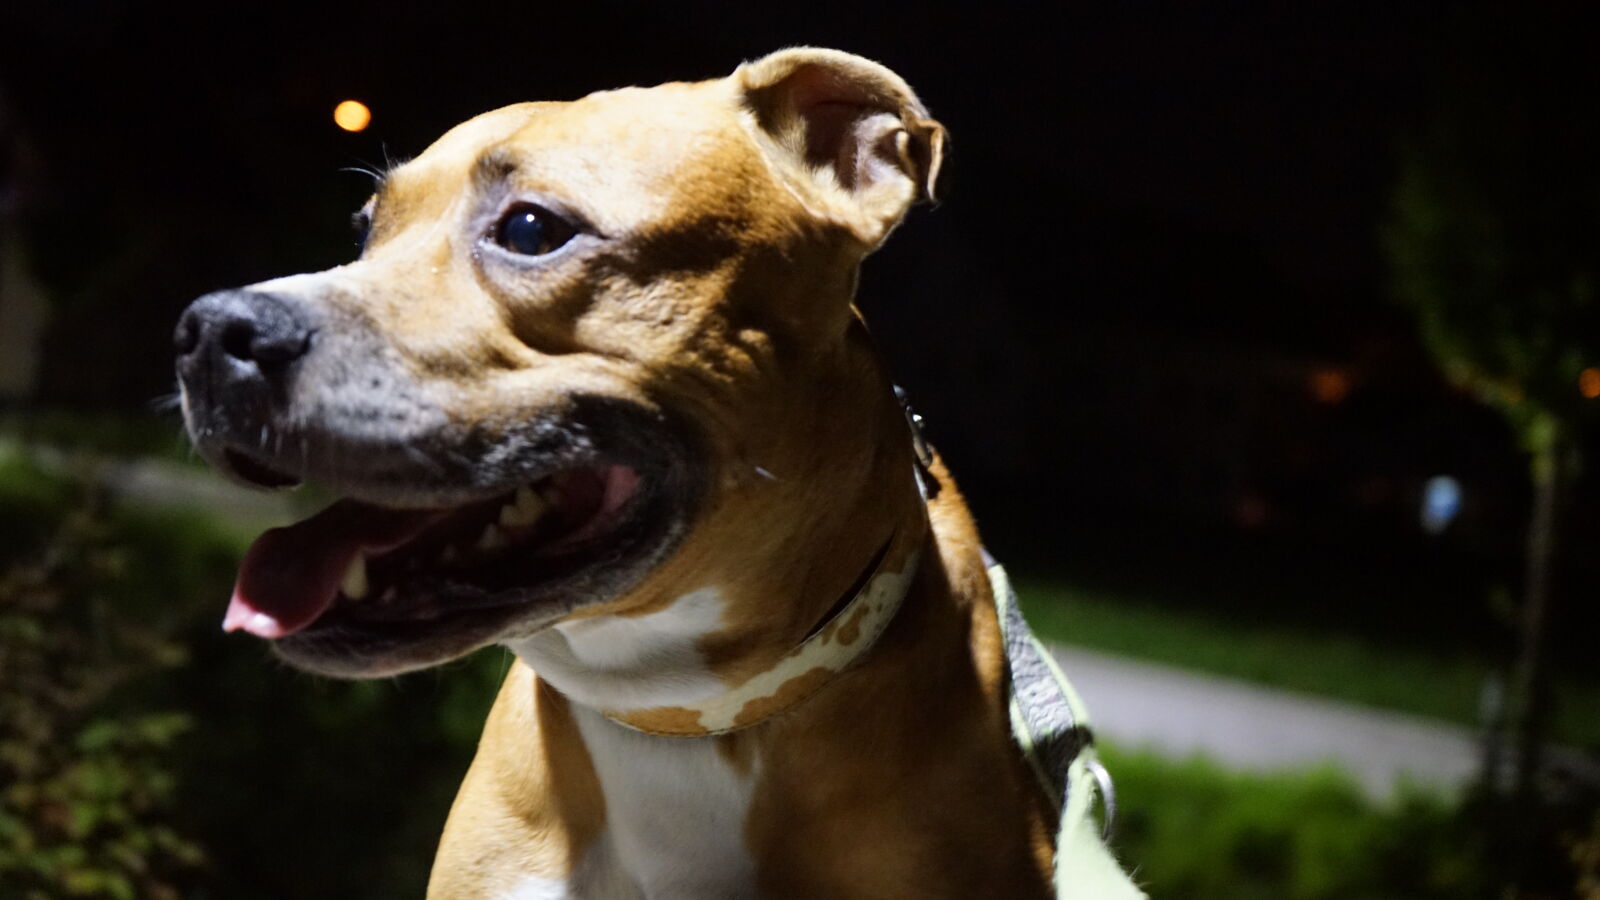 Sony a7 II + Sony FE 28-70mm F3.5-5.6 OSS sample photo. Dog, night, pit, pit photography